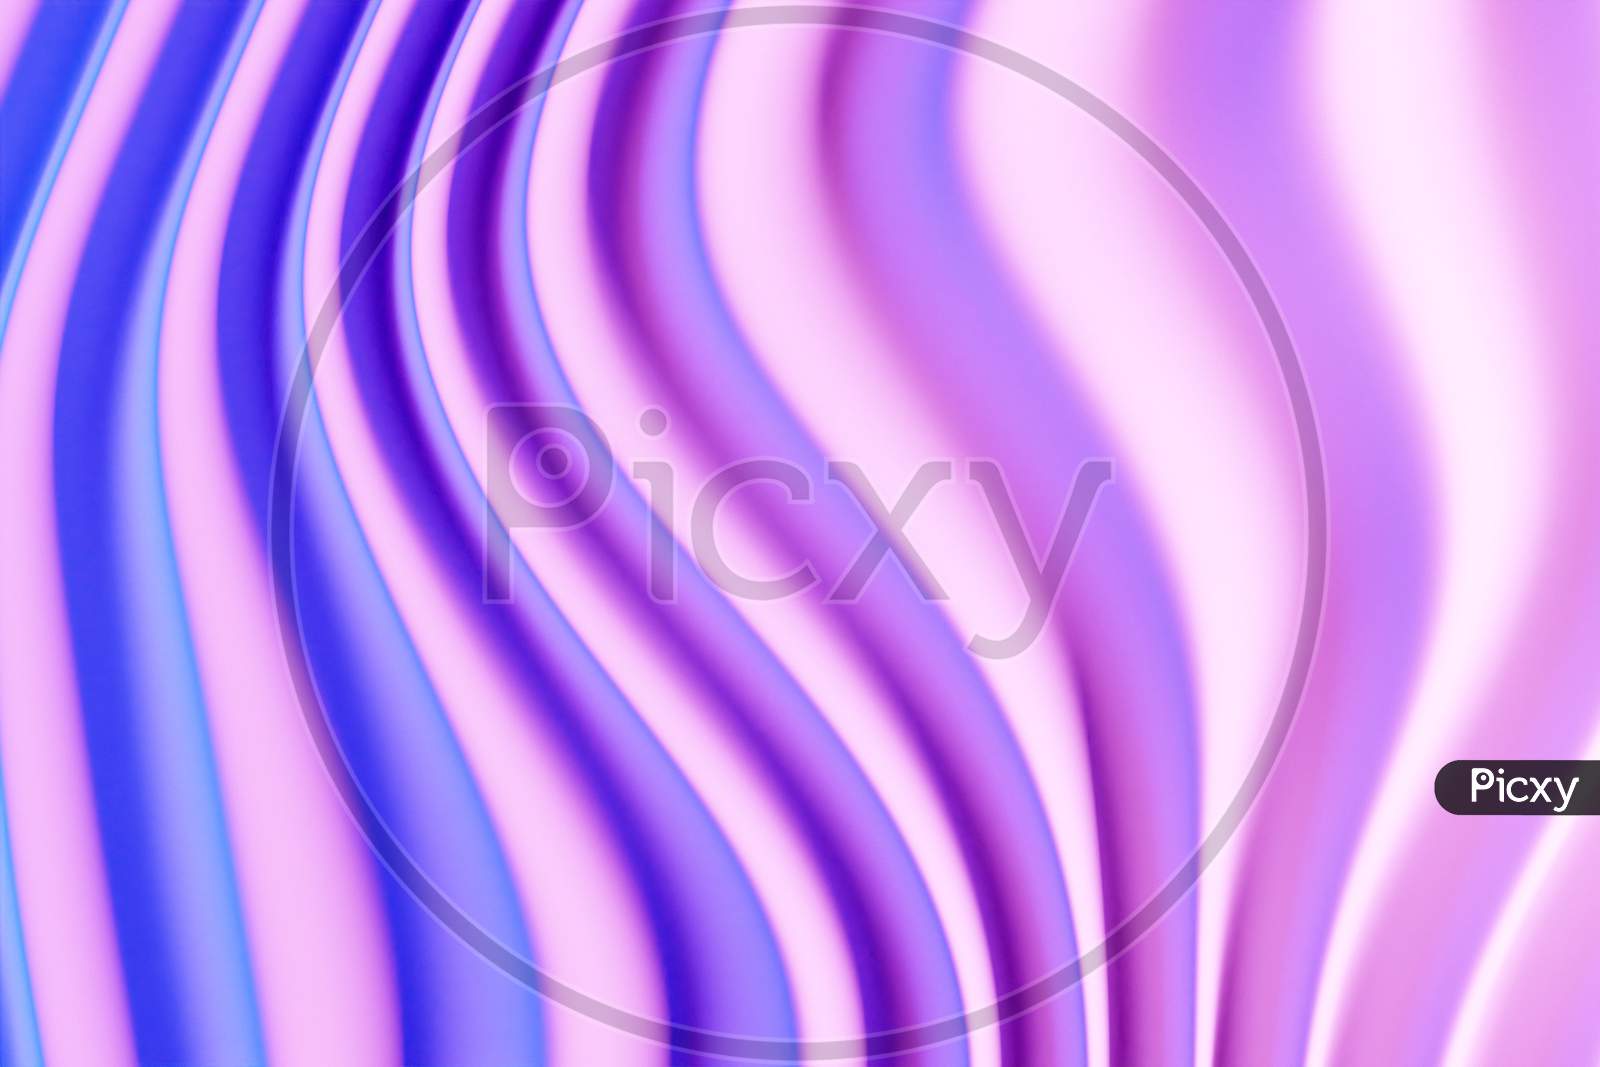 3D Illustration Of A Stereo Strip Of Different Colors. Geometric Stripes Similar To Waves. Abstract   Pink  Glowing Crossing Lines Pattern